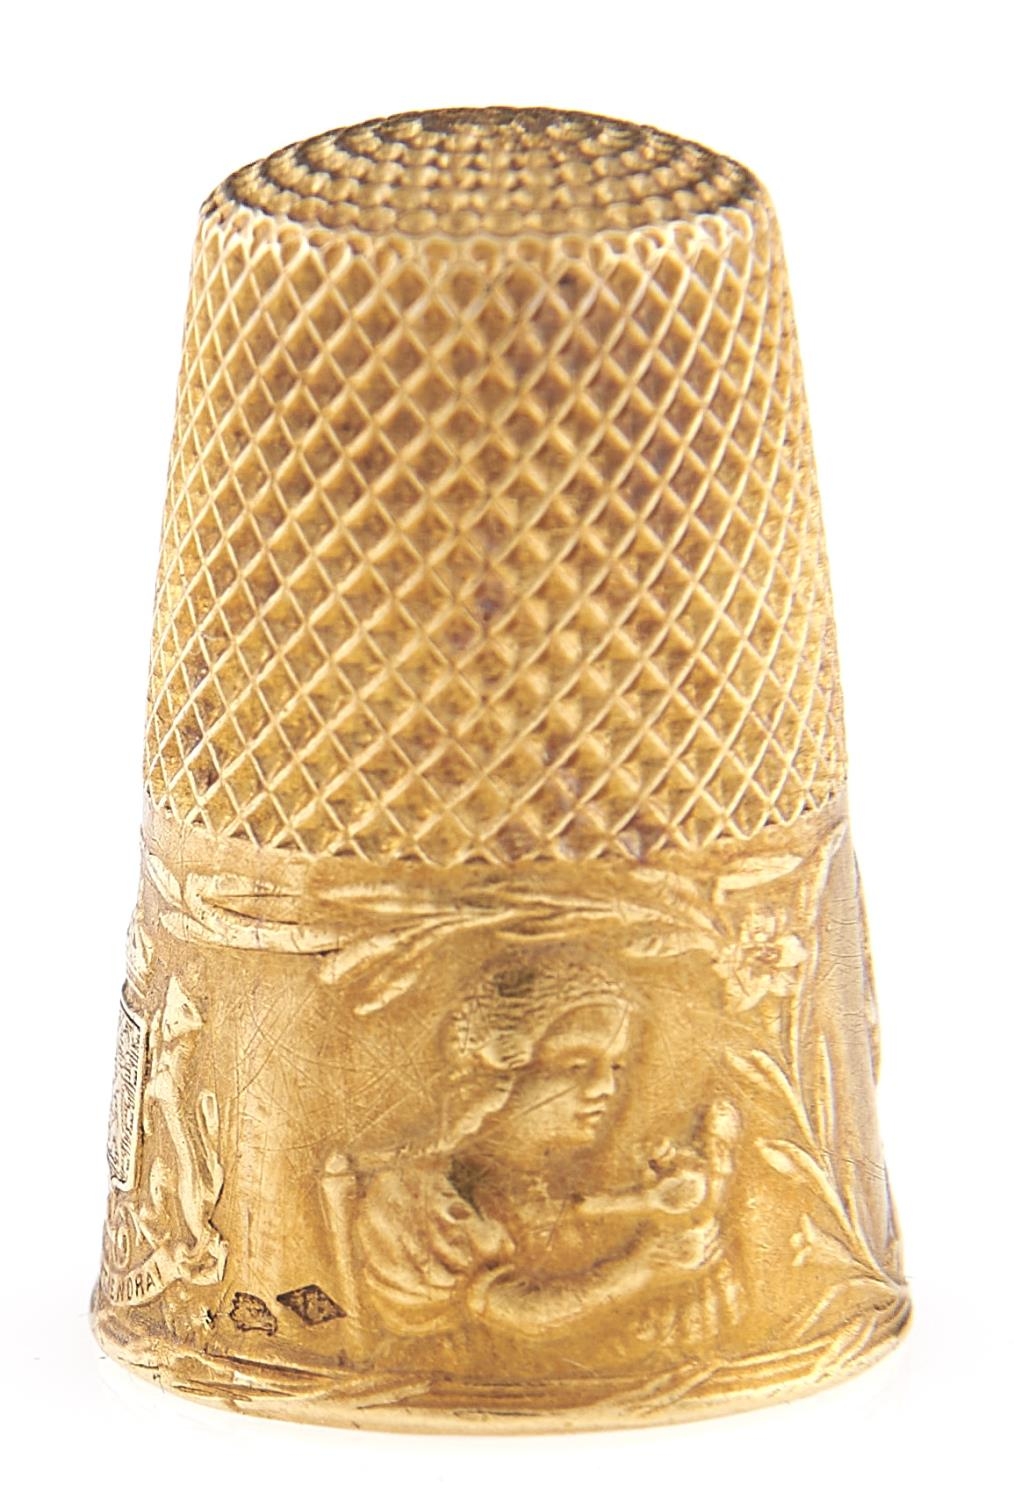 A French gold thimble, c1900, embossed with the heads of children and coat of arms, 24mm, maker's